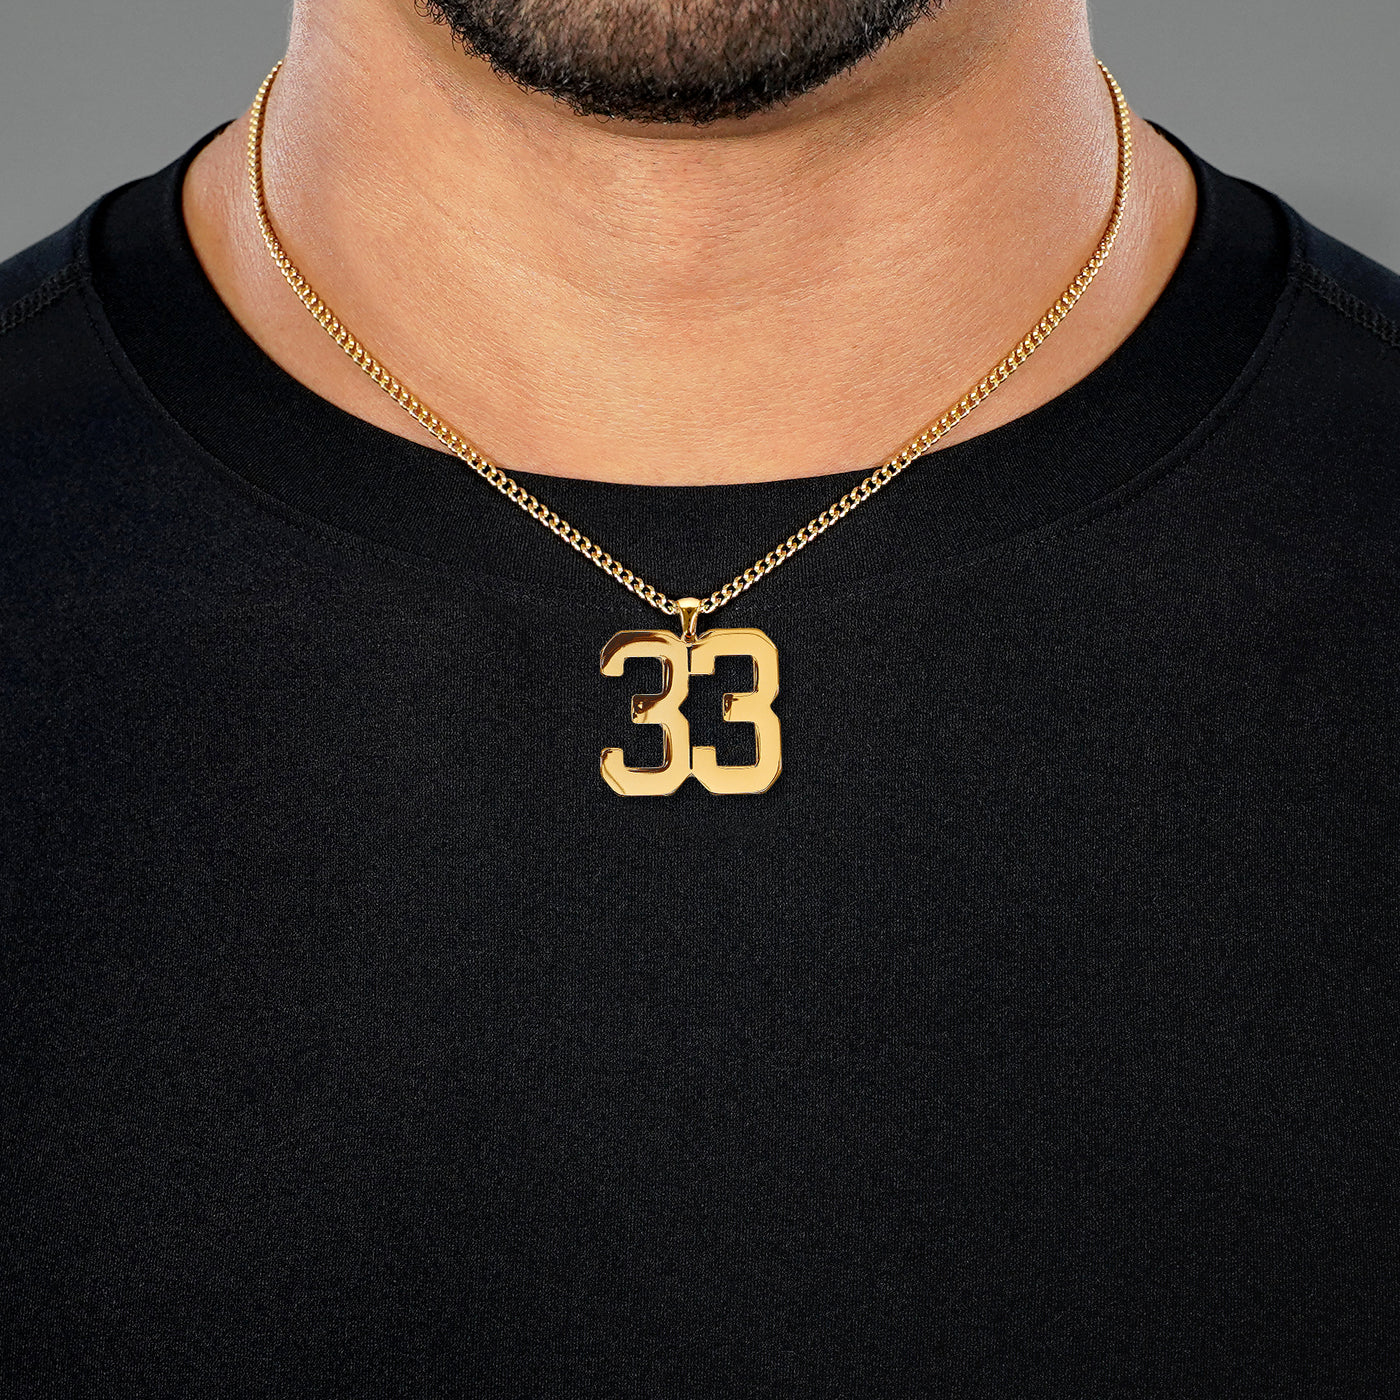 33 Number Pendant with Chain Necklace - Gold Plated Stainless Steel